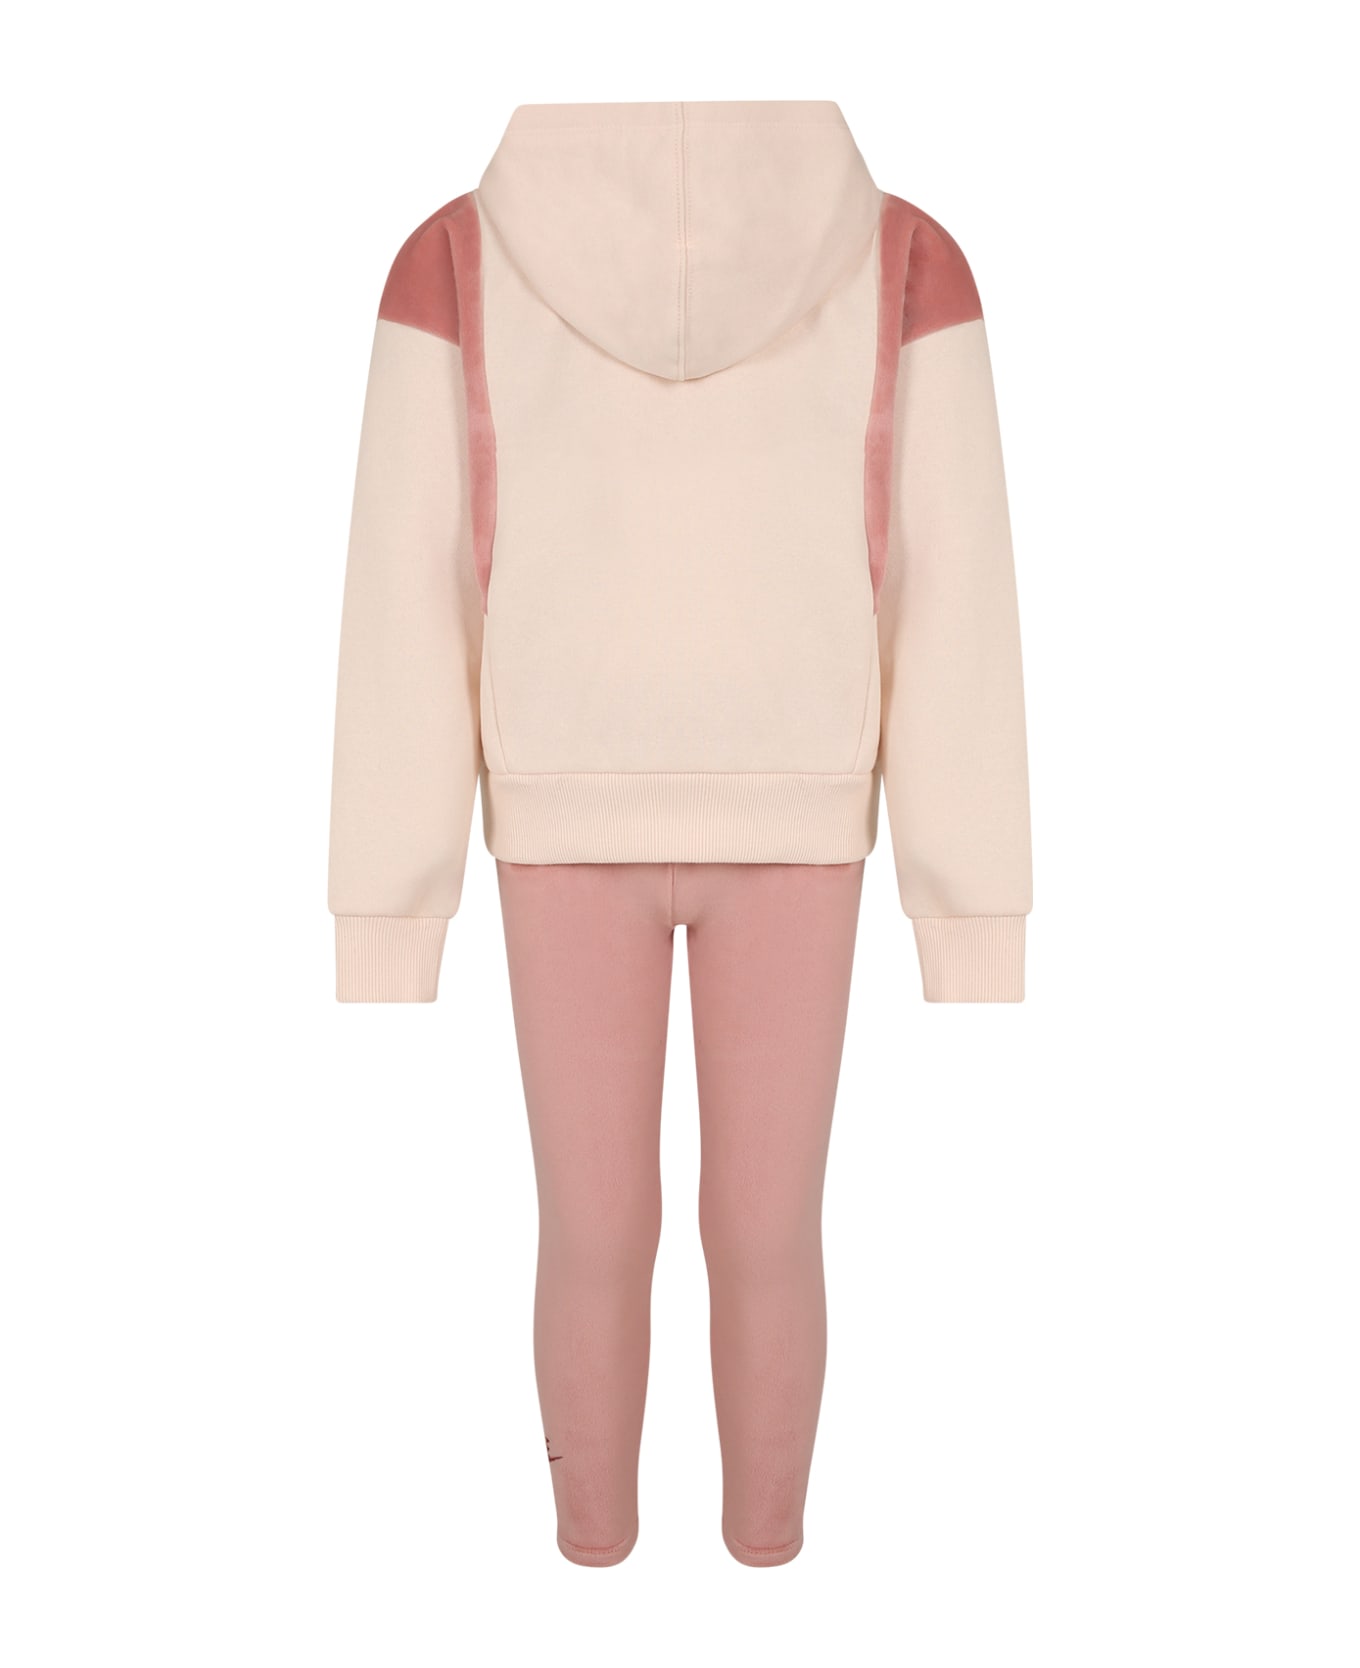 Nike Pink Suit For Girl With Logo - Pink ジャンプスーツ